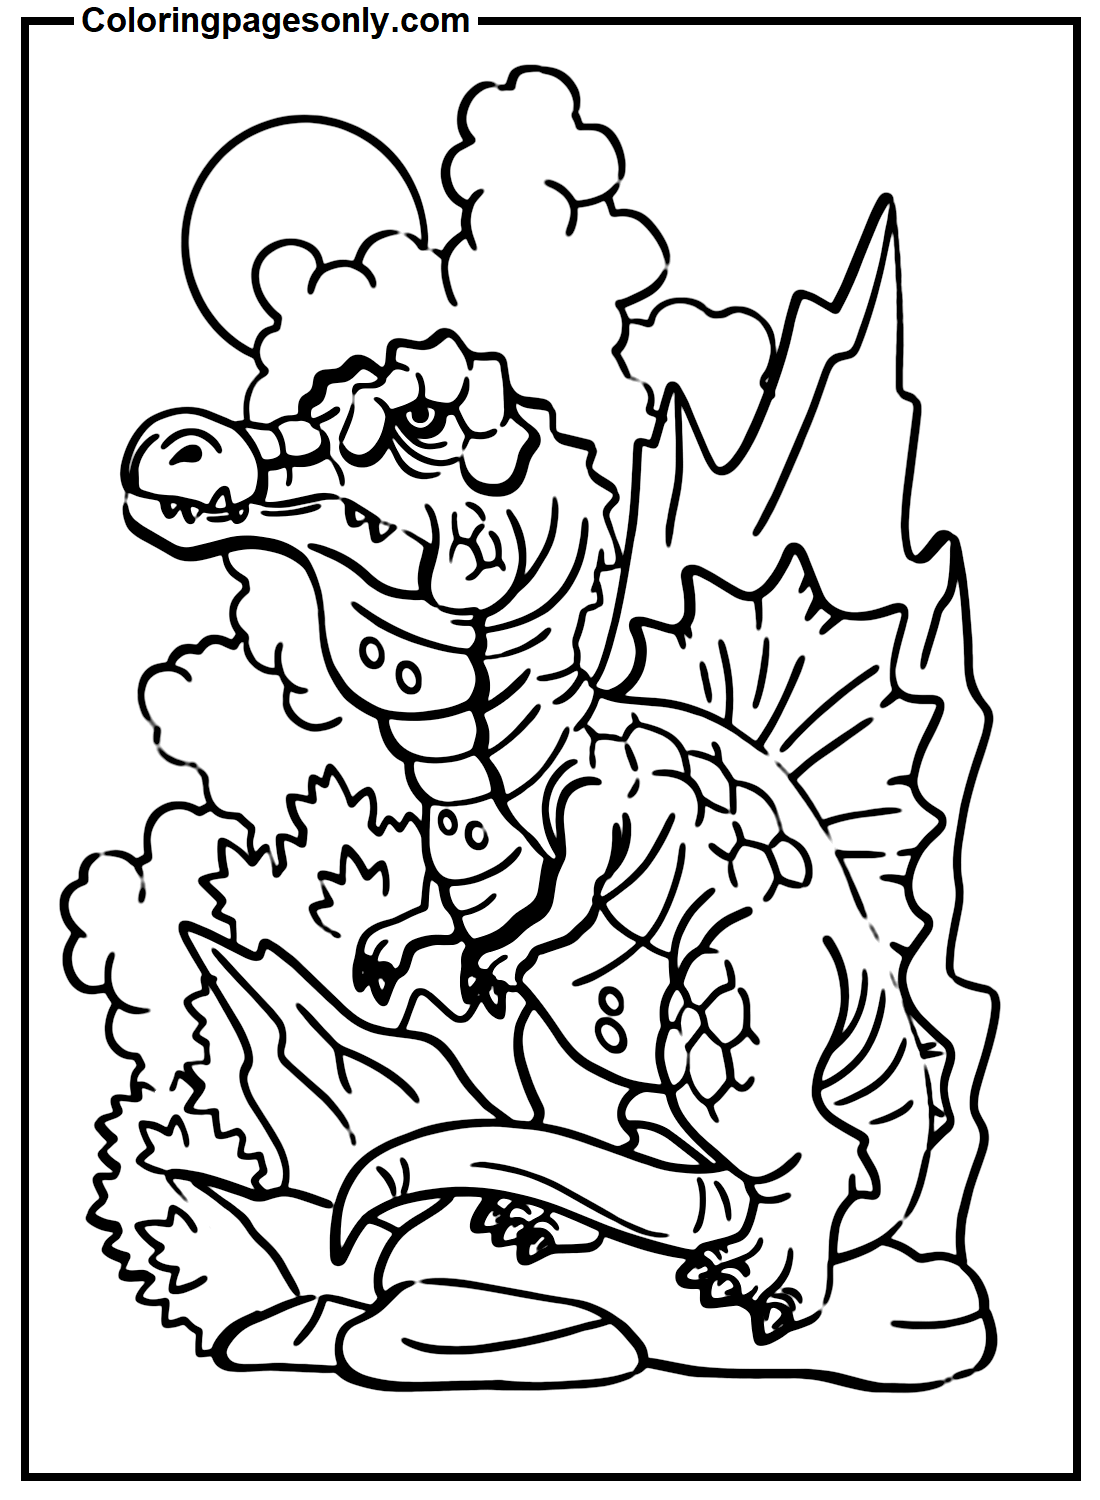 Spinosaurus Color Sheets Coloring Pages